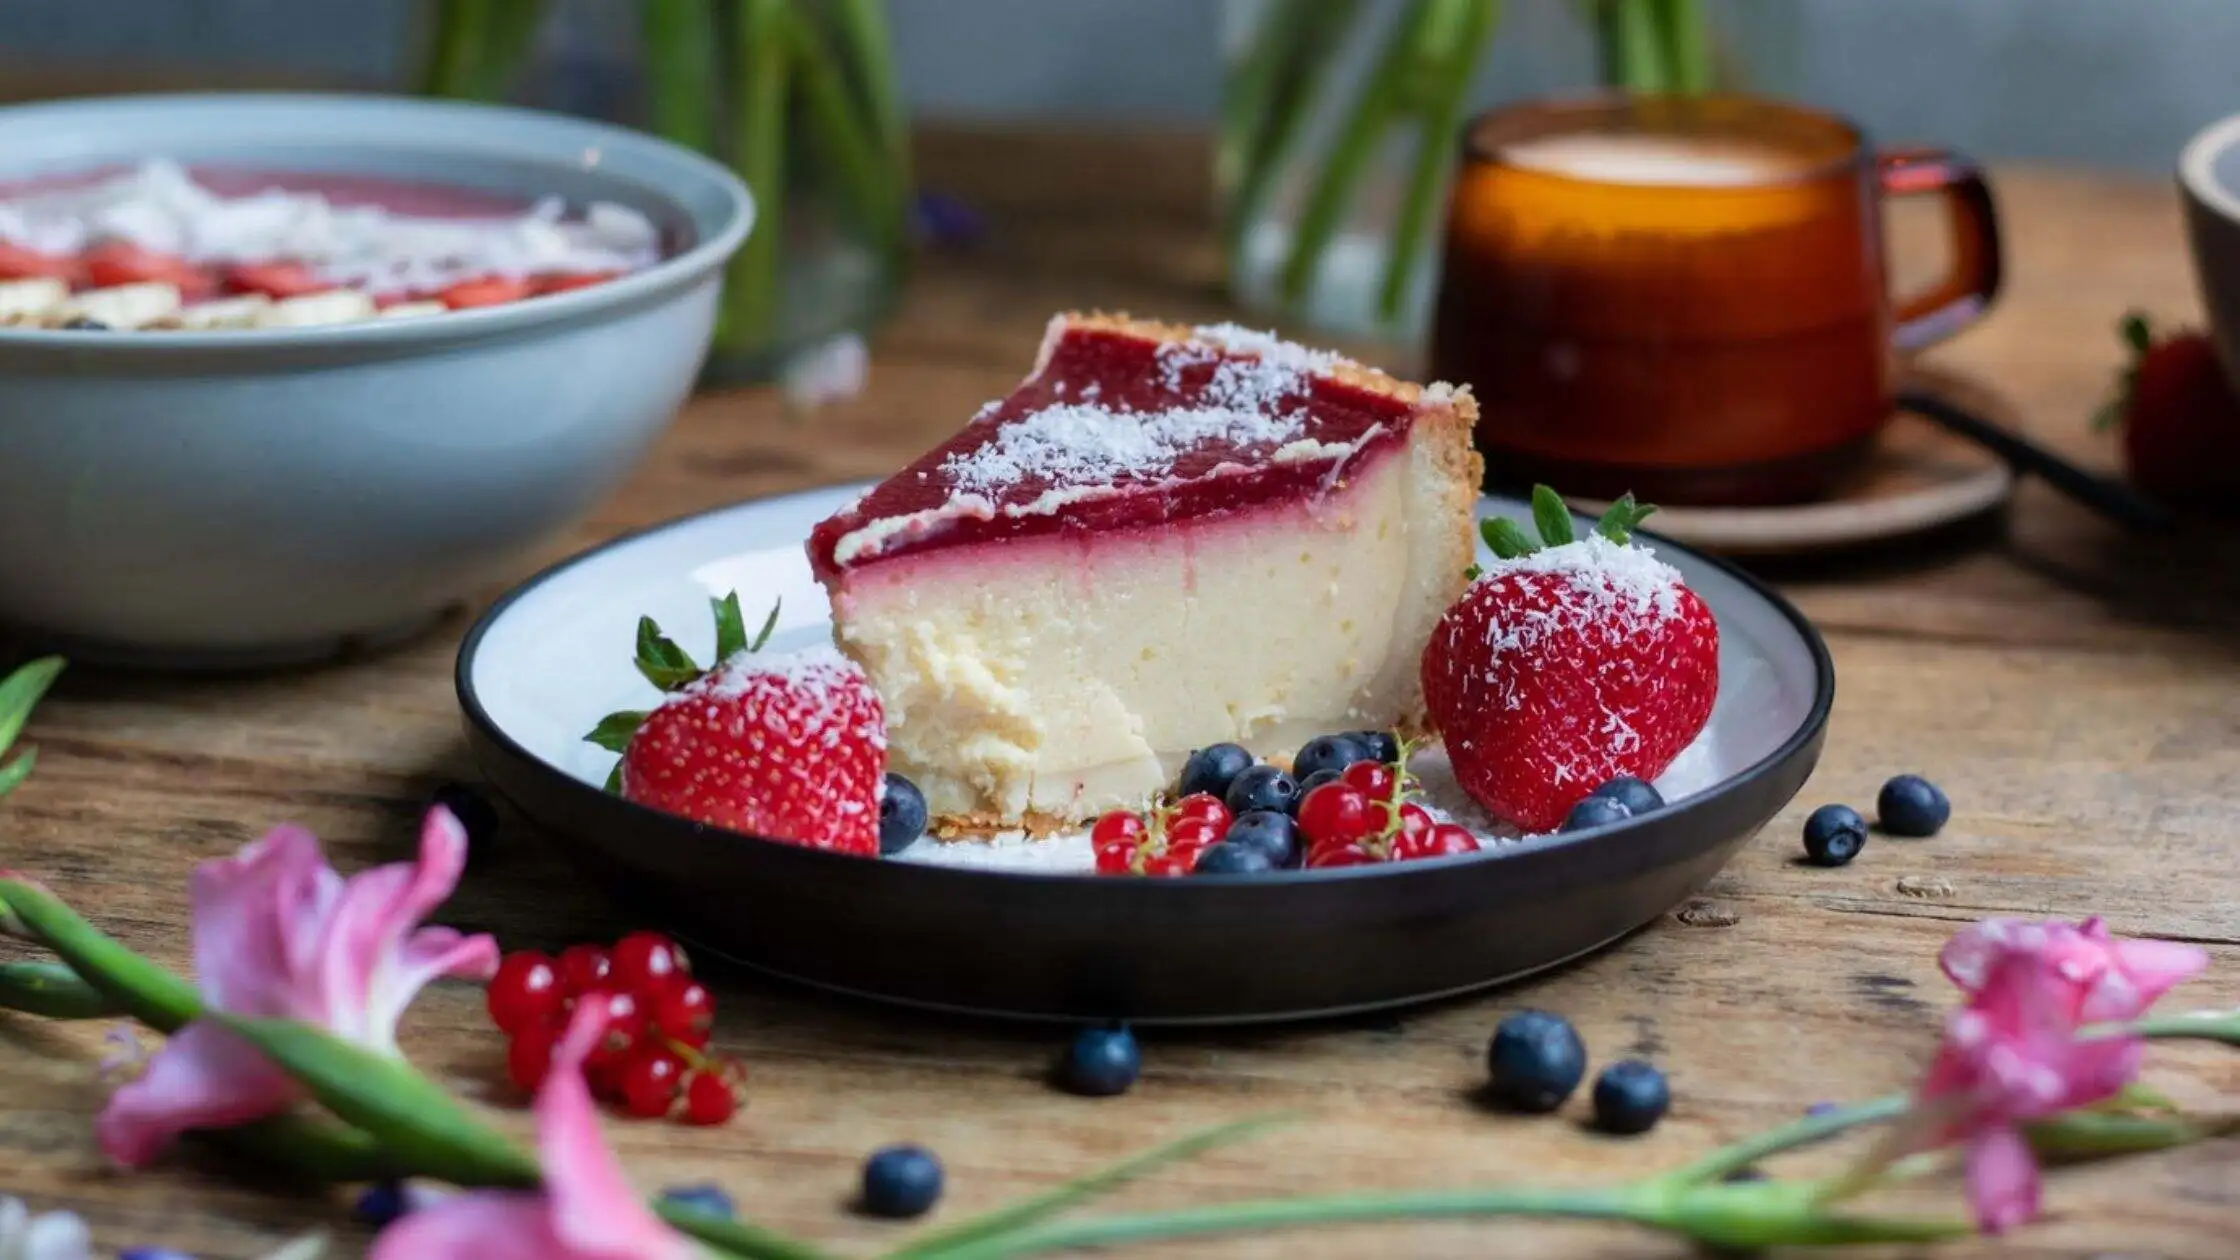 How Long Is Cheesecake Good For?